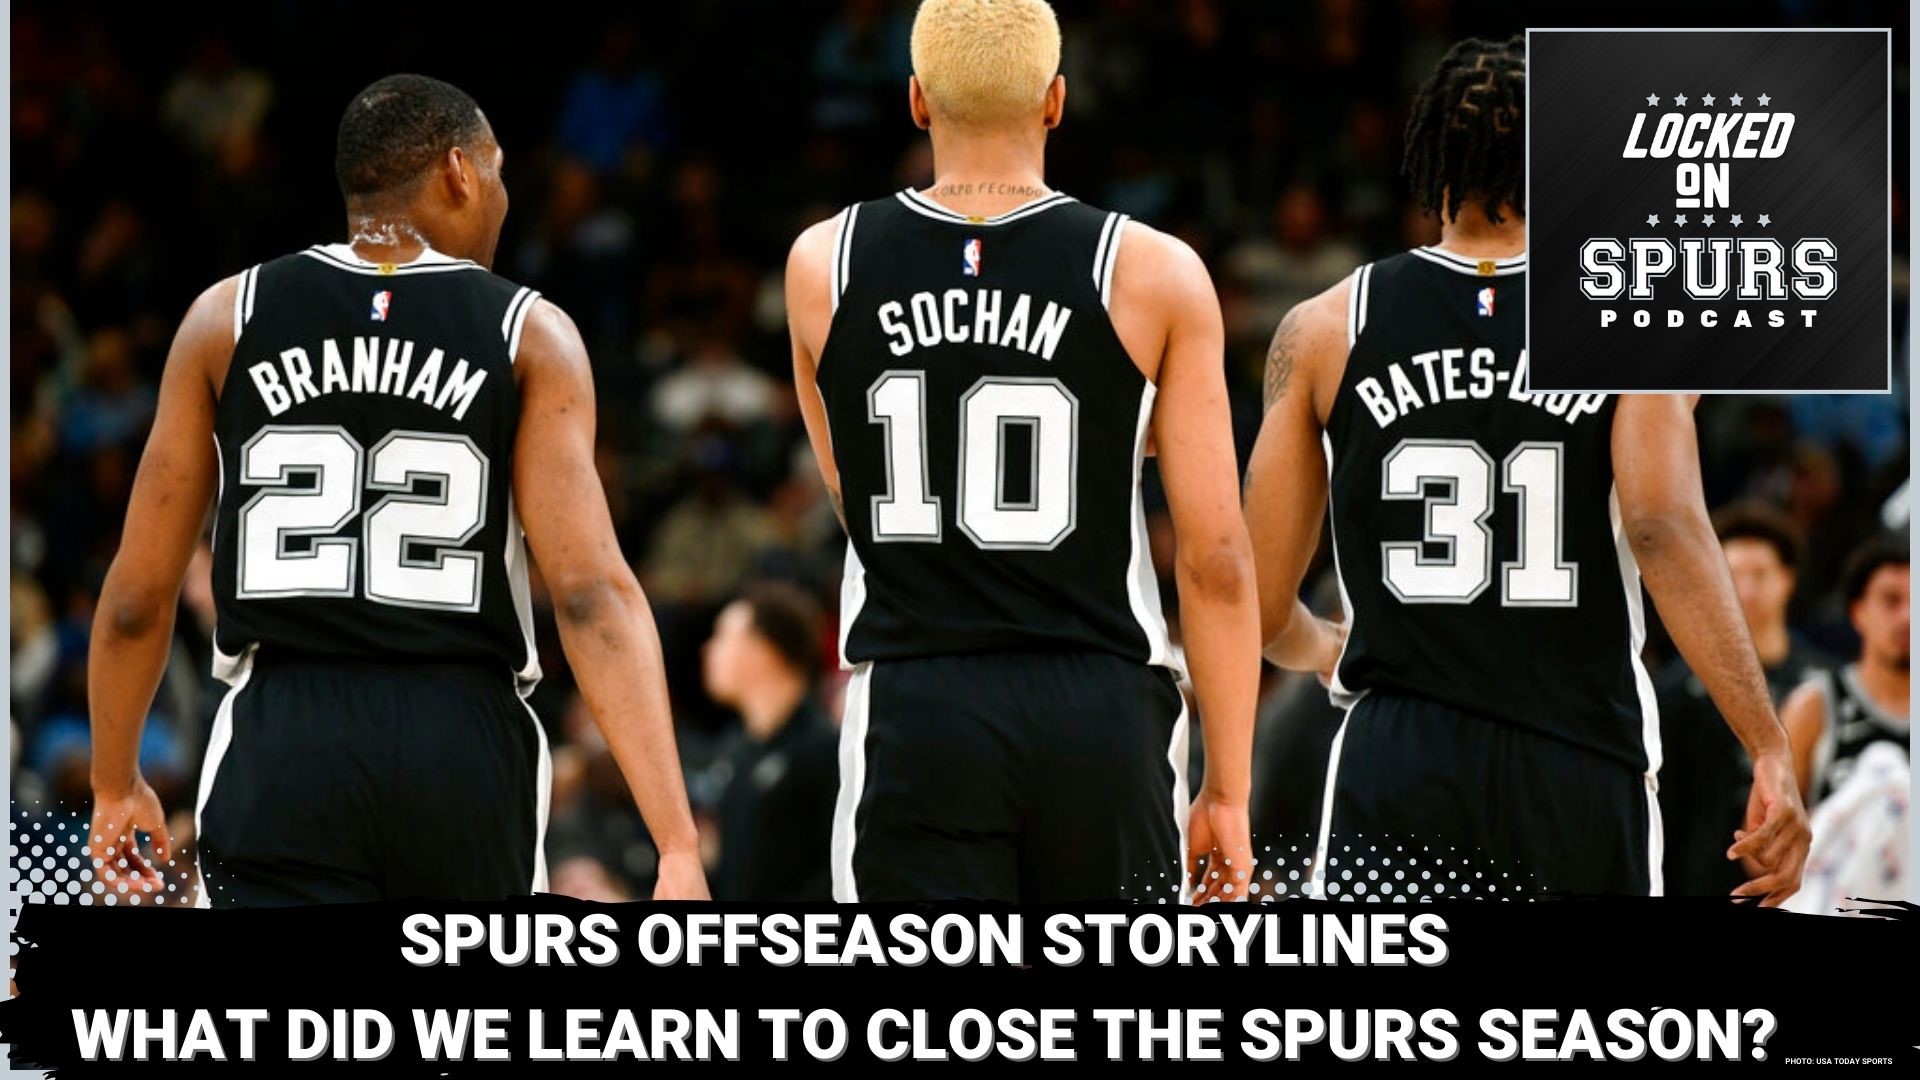 The Spurs enter the off-season with some lingering questions.